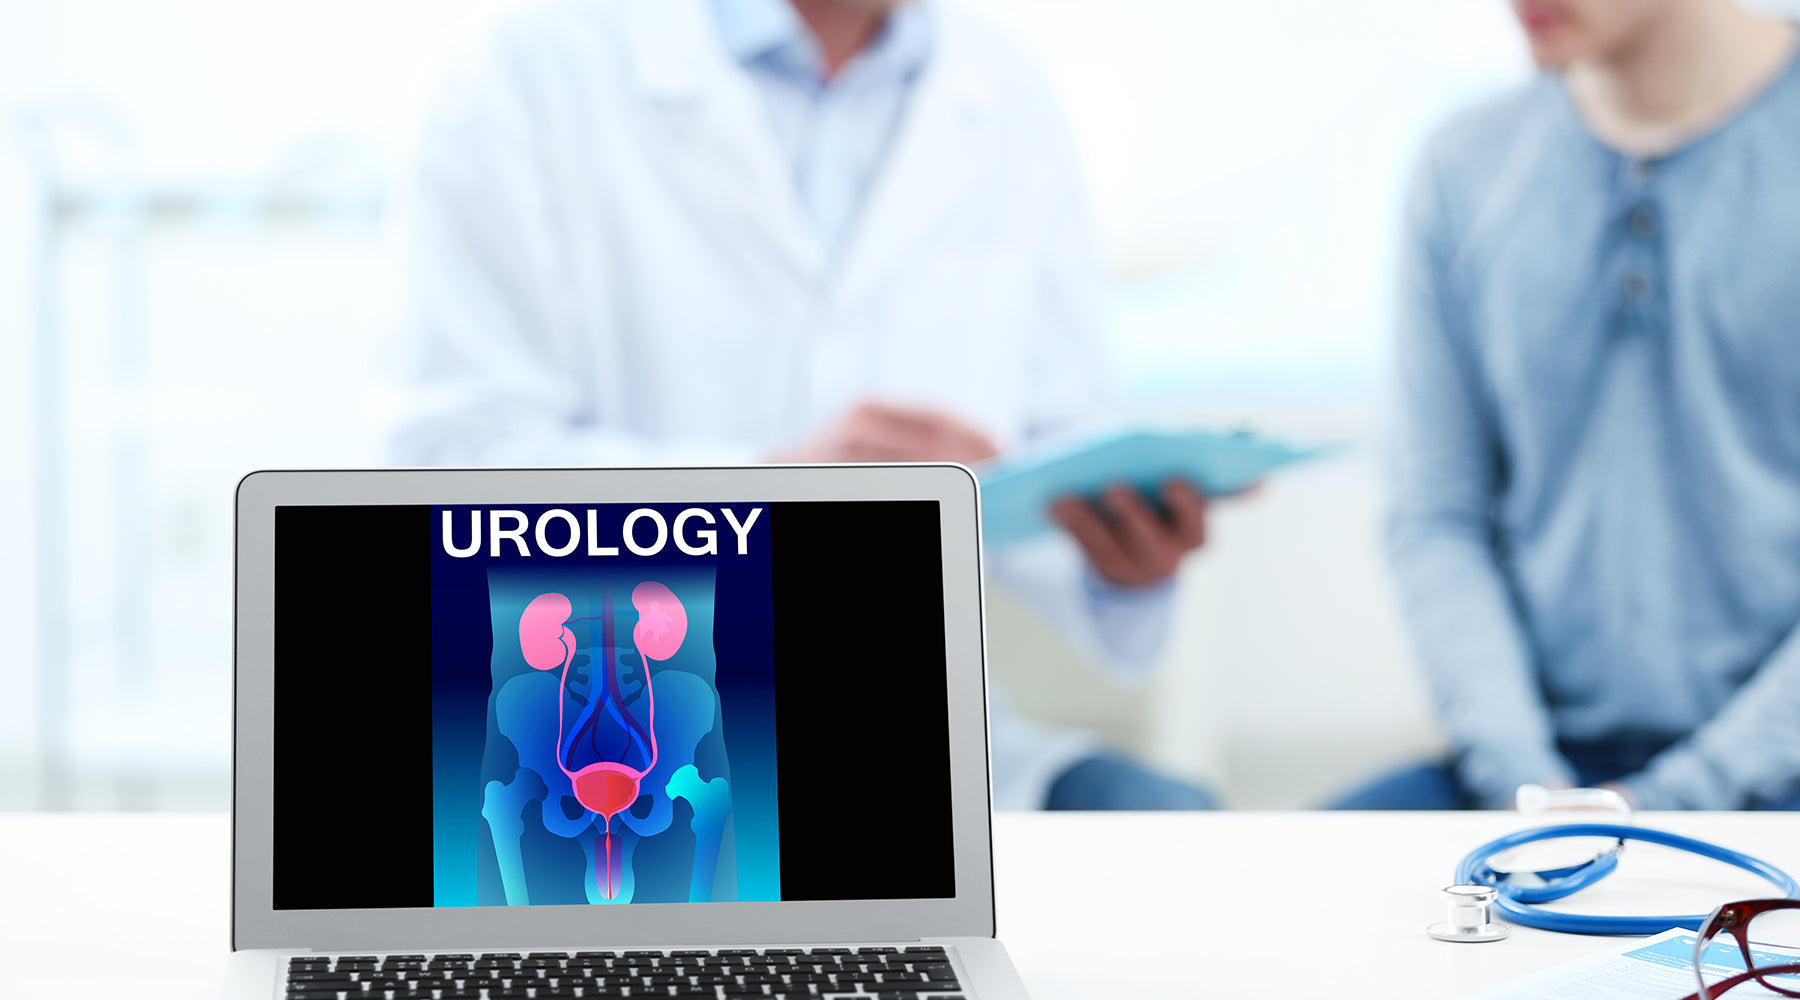 Prostate PSA Testing: What You Need to Know